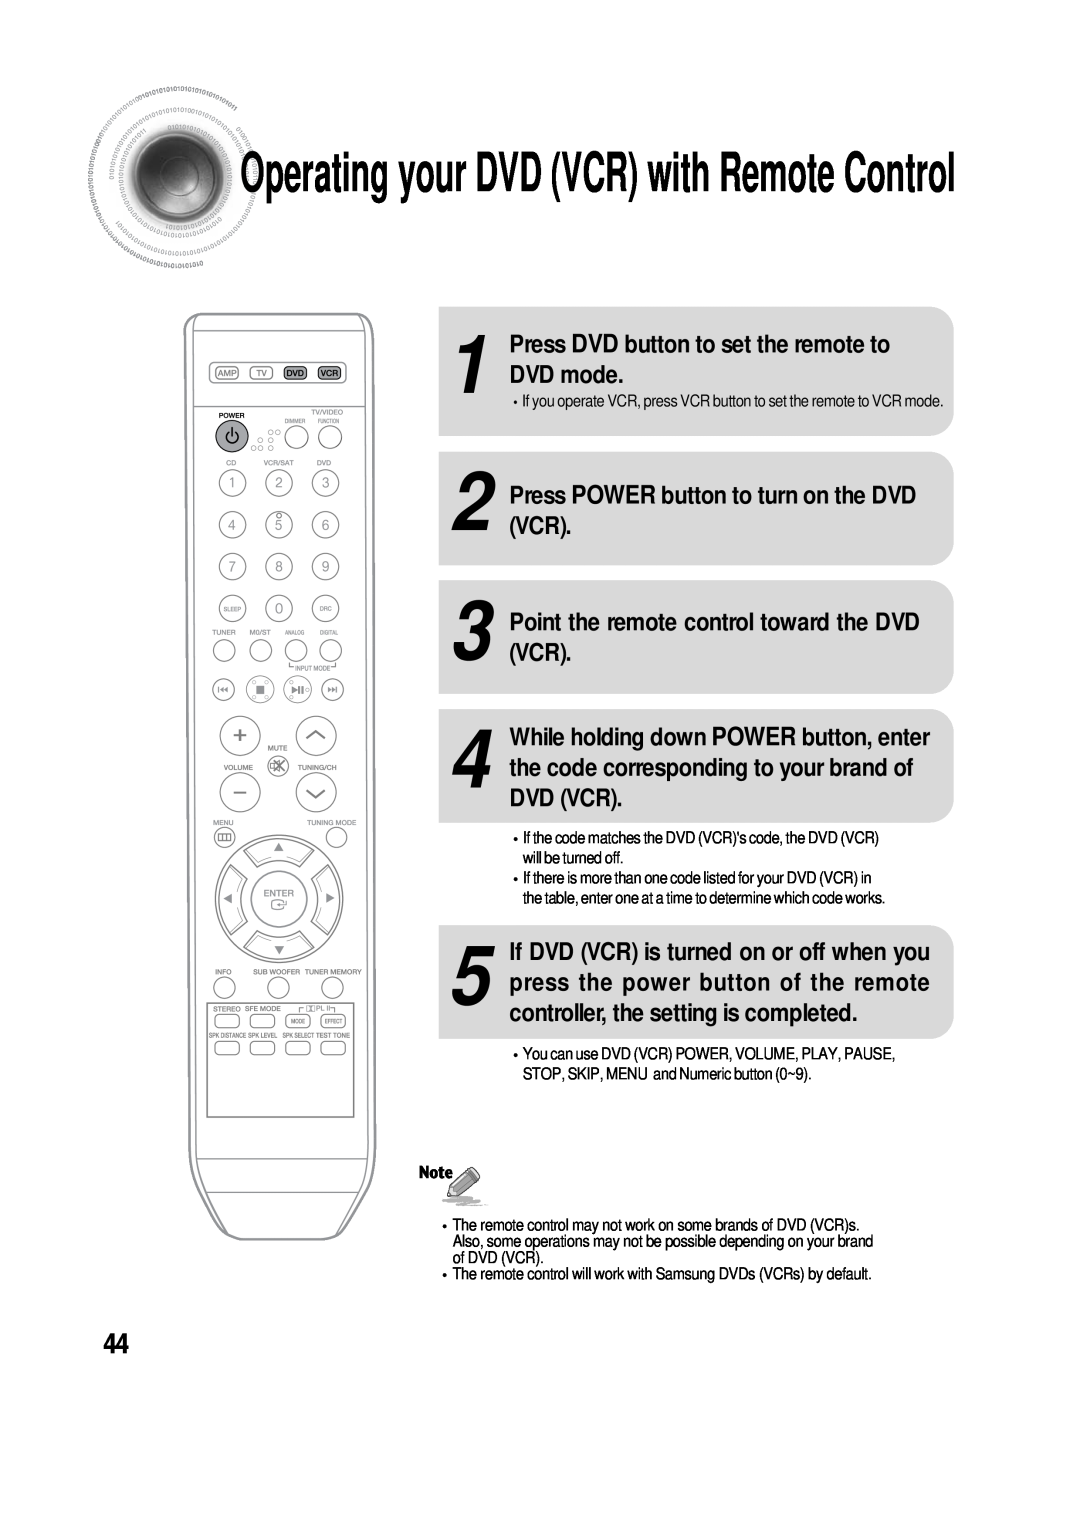 Samsung 20060510083254531 manual Operatingyour DVD VCR with Remote Control, Press DVD button to set the remote to DVD mode 